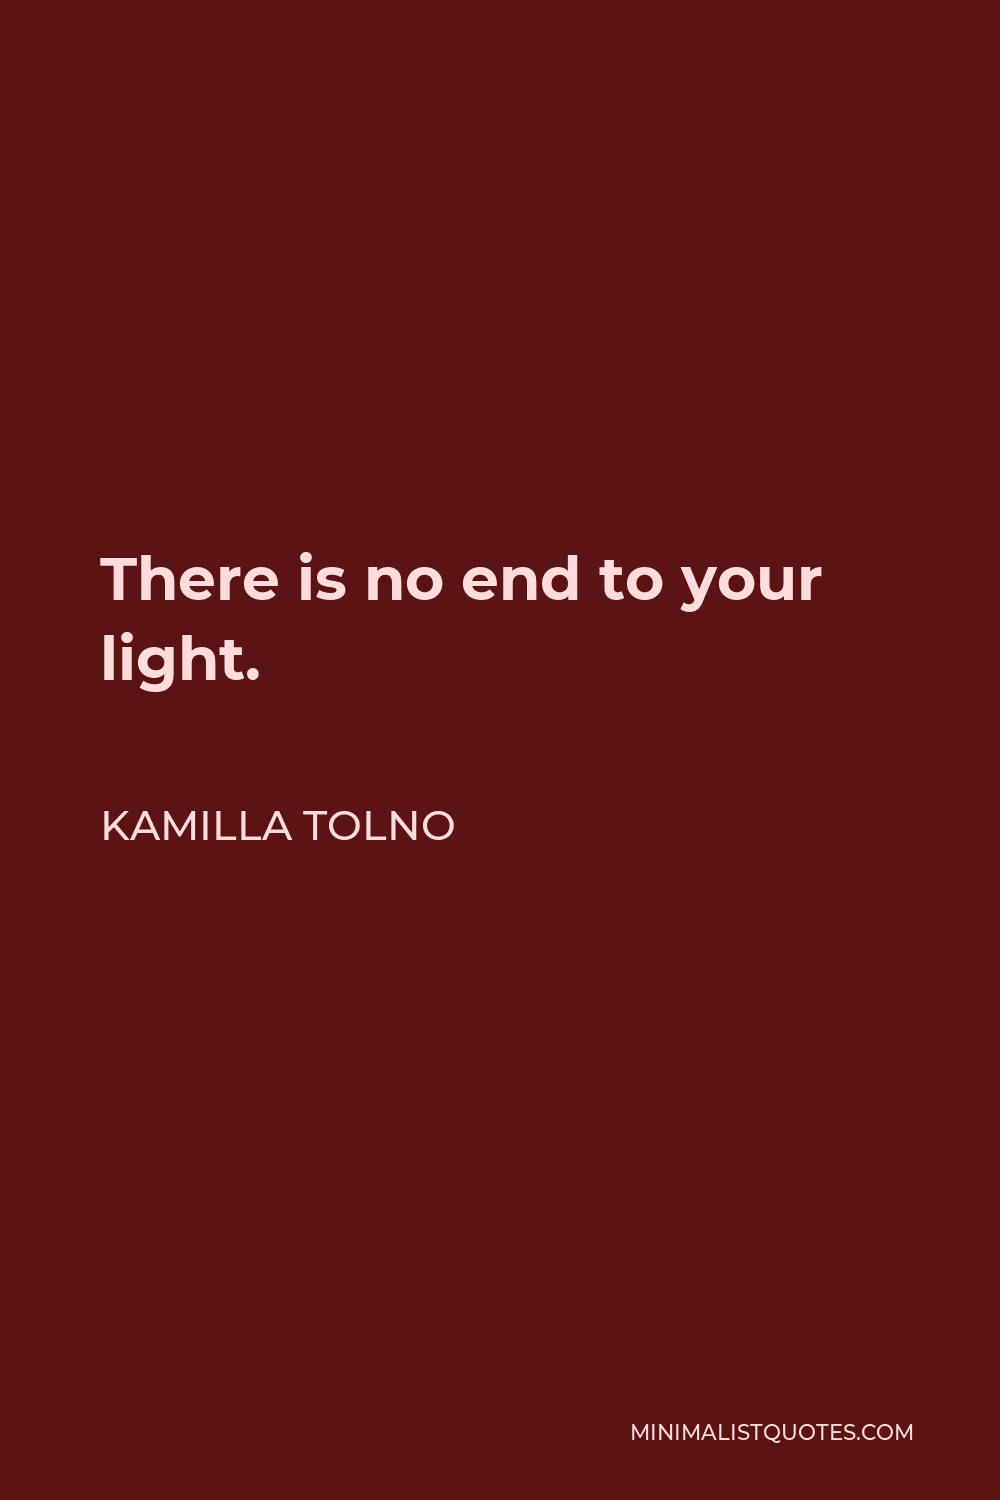 Kamilla Tolno Quote - There is no end to your light.